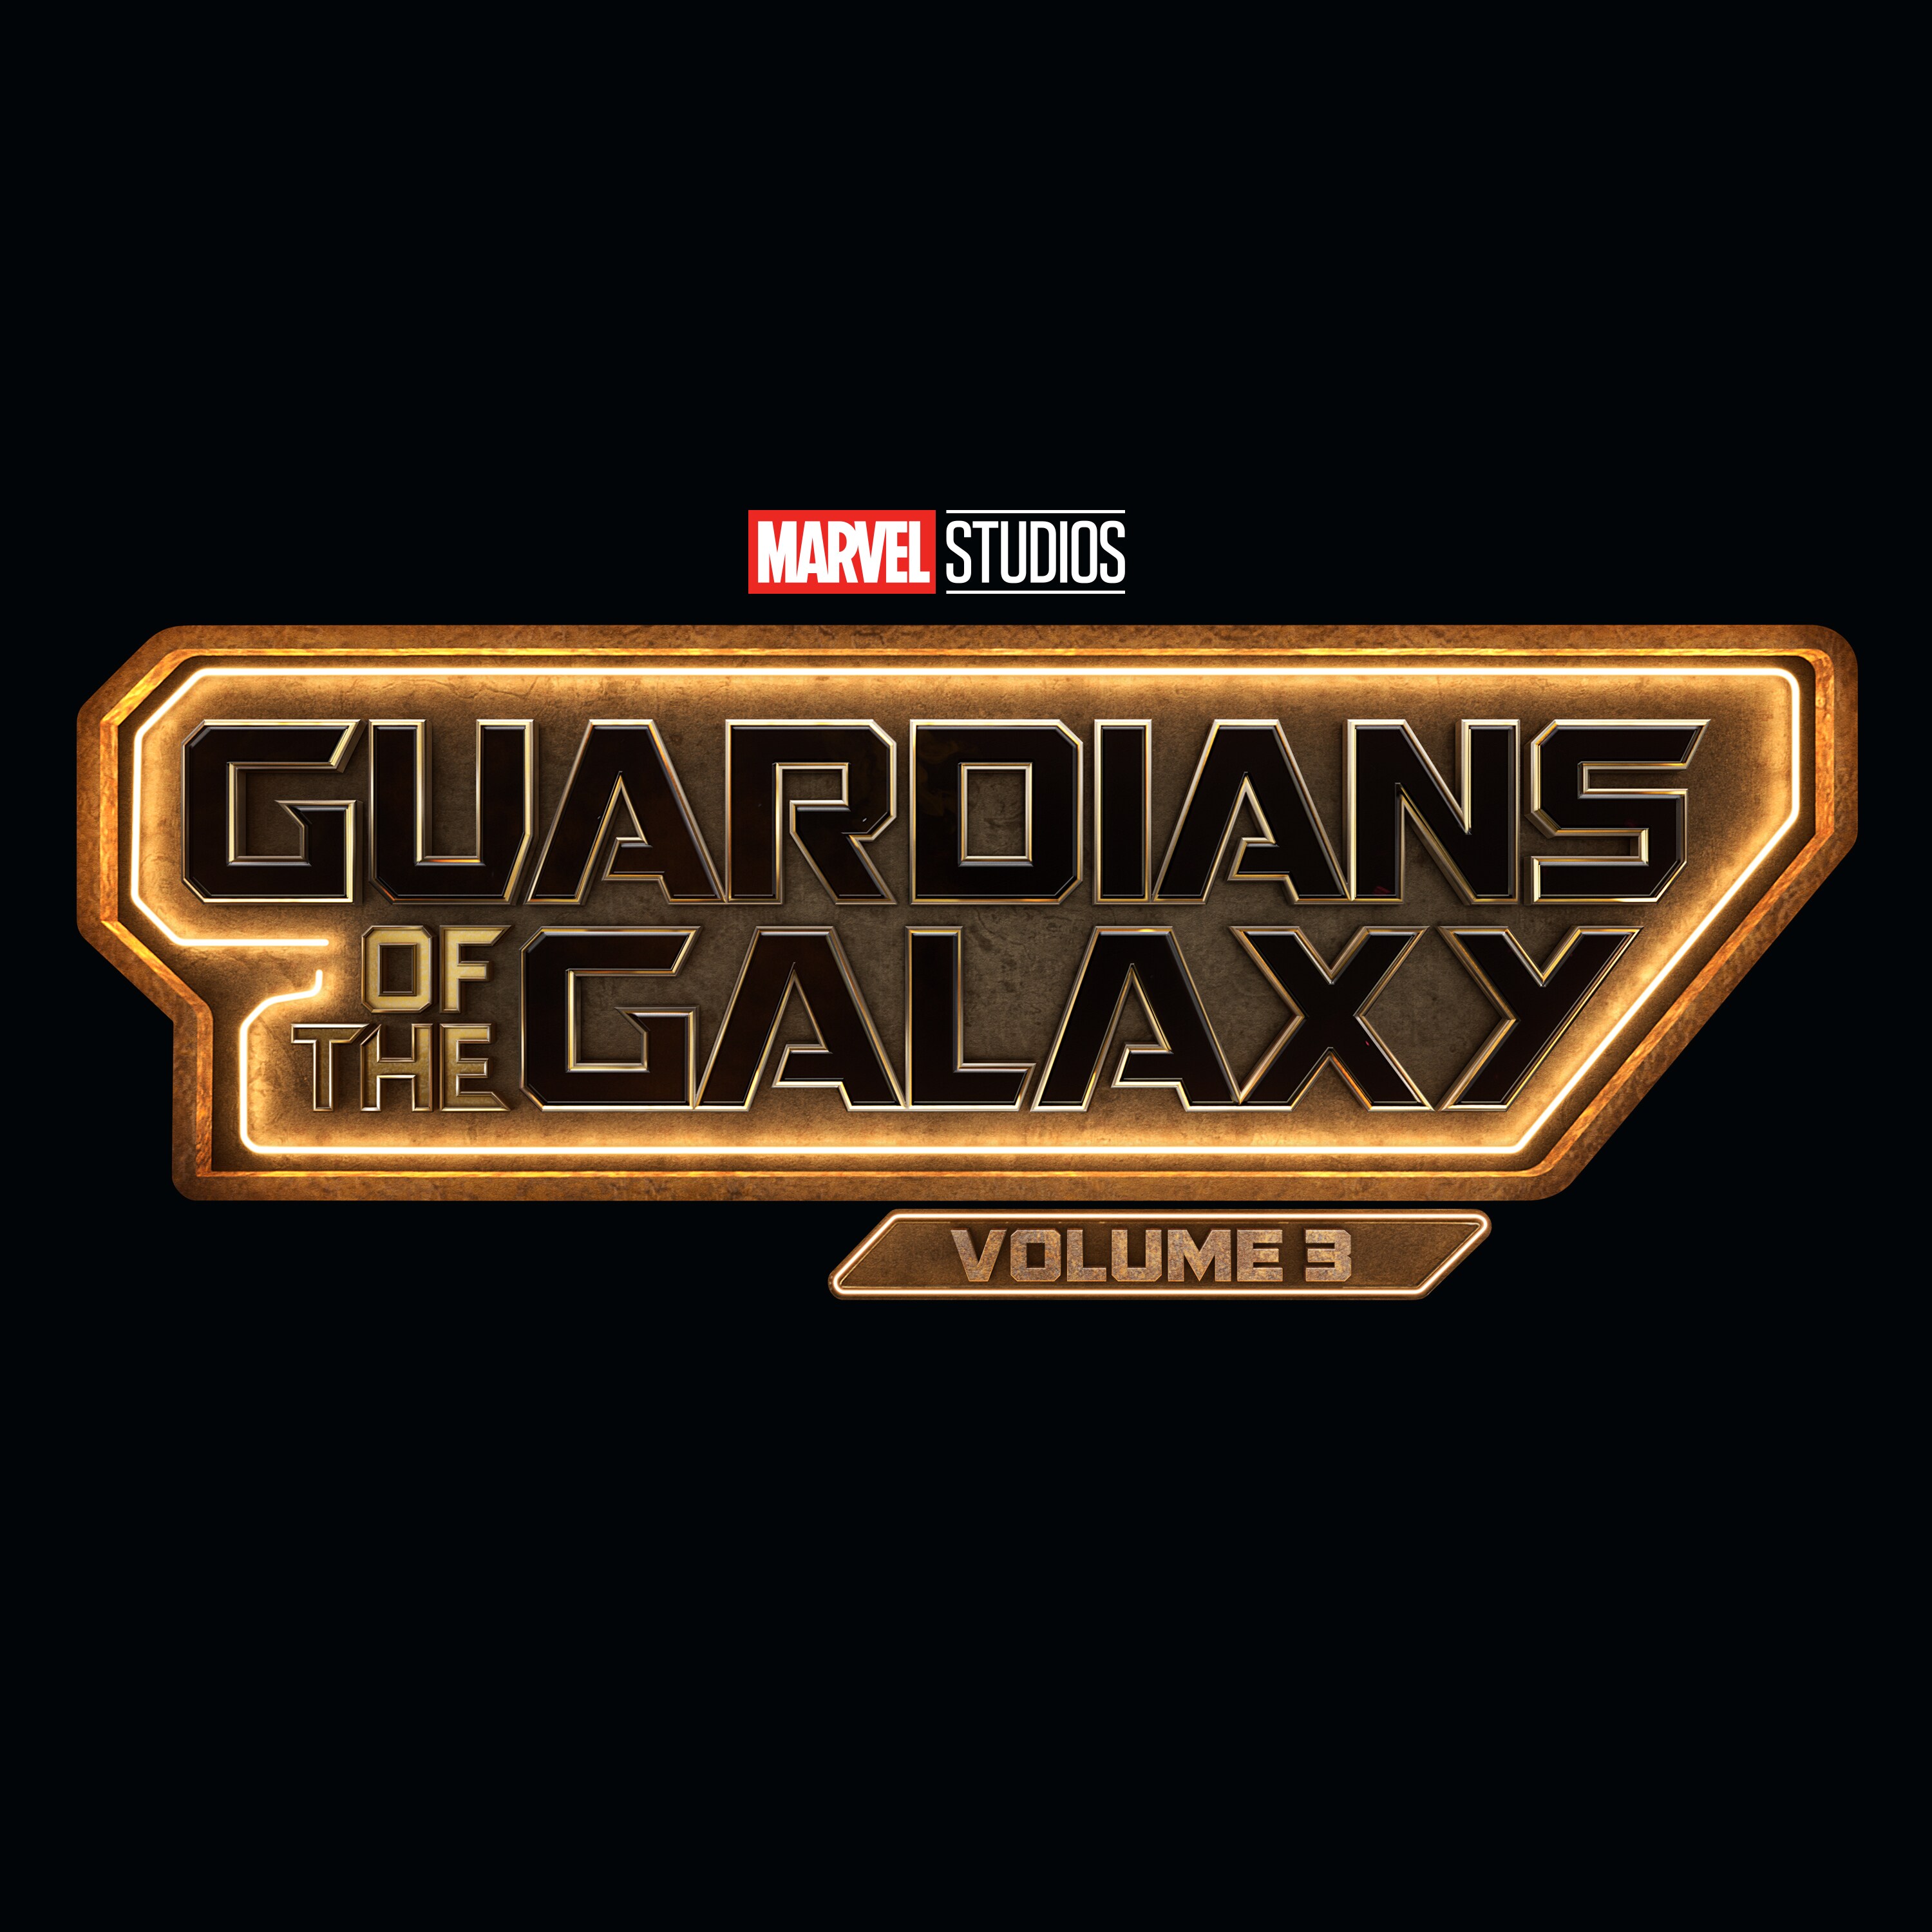 Guardians of the Galaxy Vol. 3 title treatment